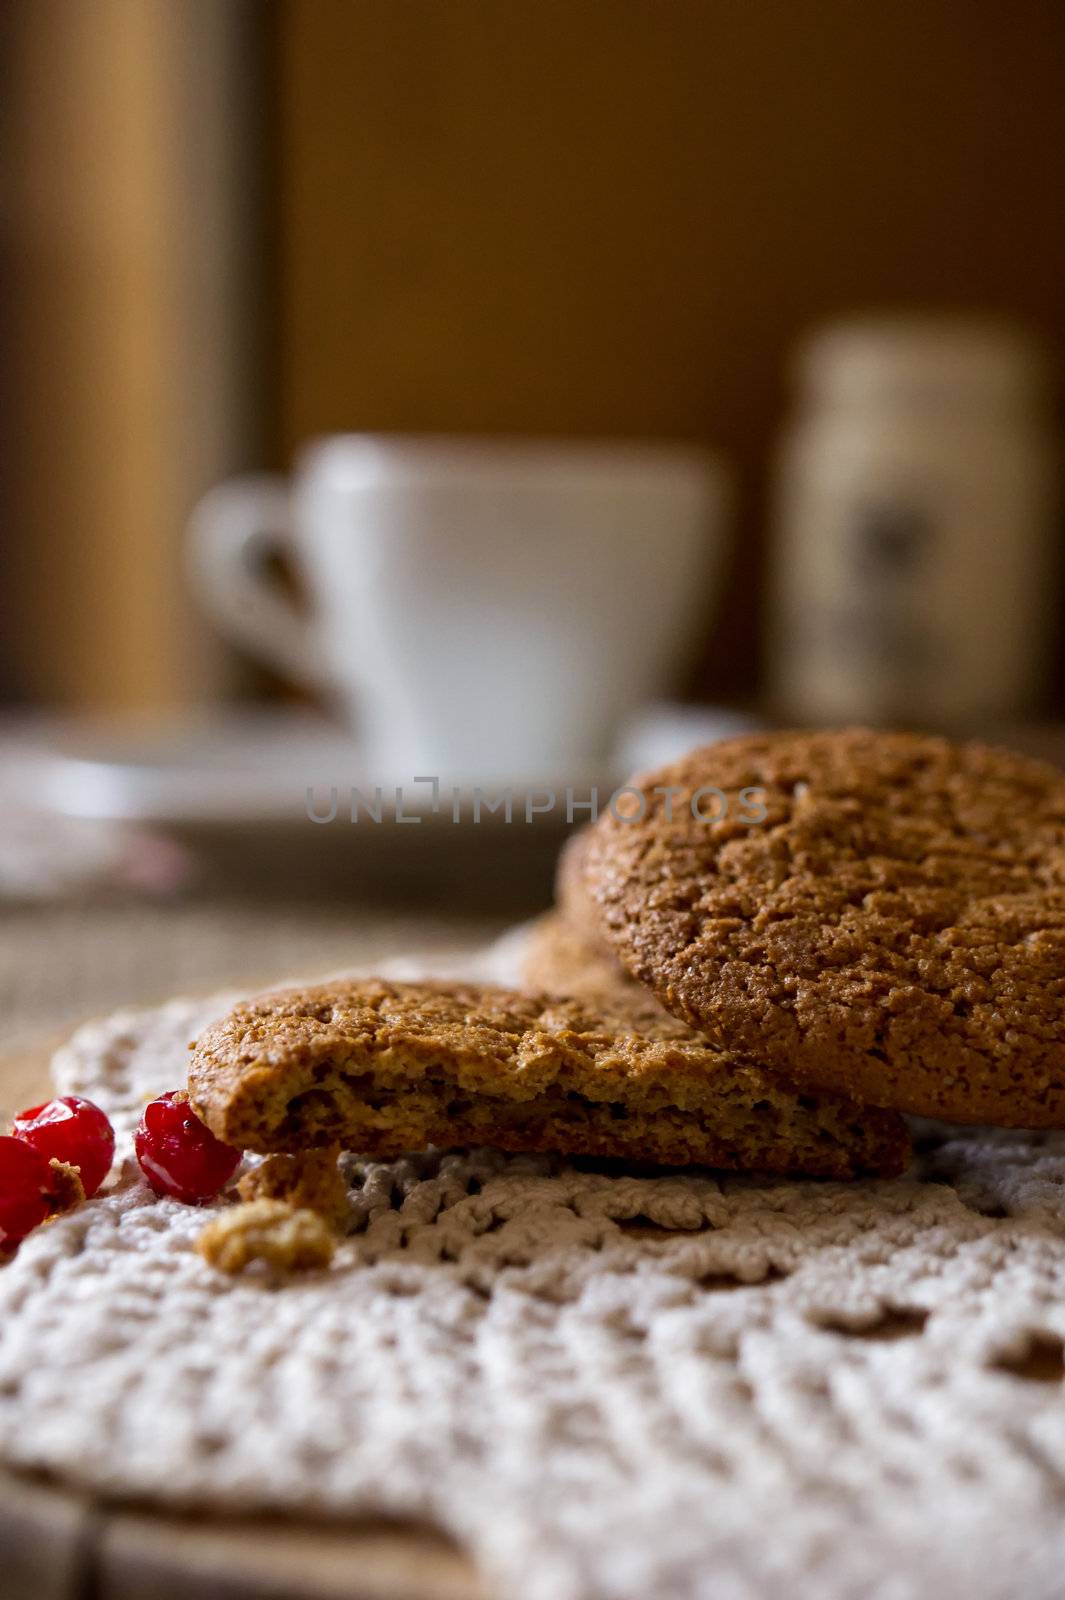 Oatmeal cookies with cranberries on knitting cloth by kirs-ua